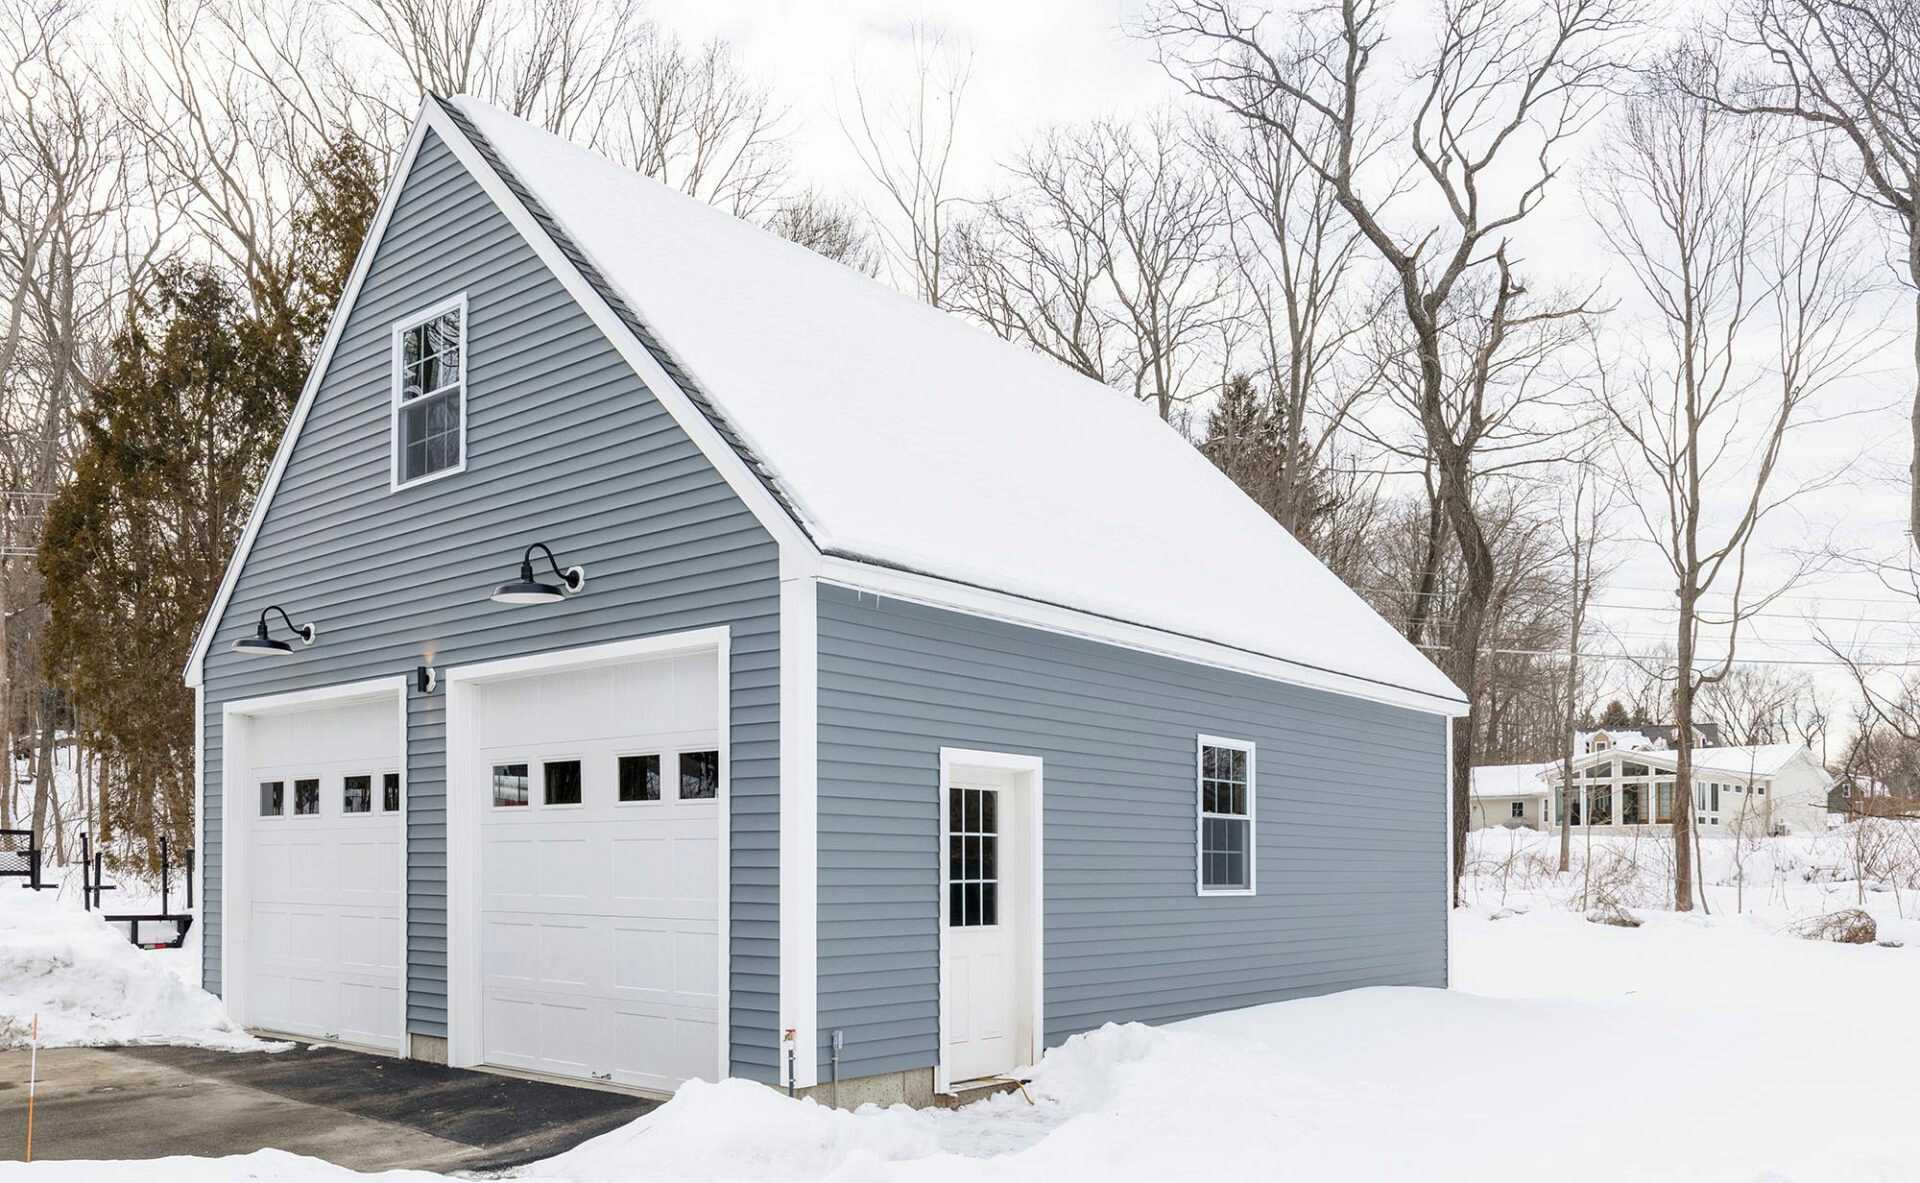 Dreaming of Building Your Custom Garage This Winter?